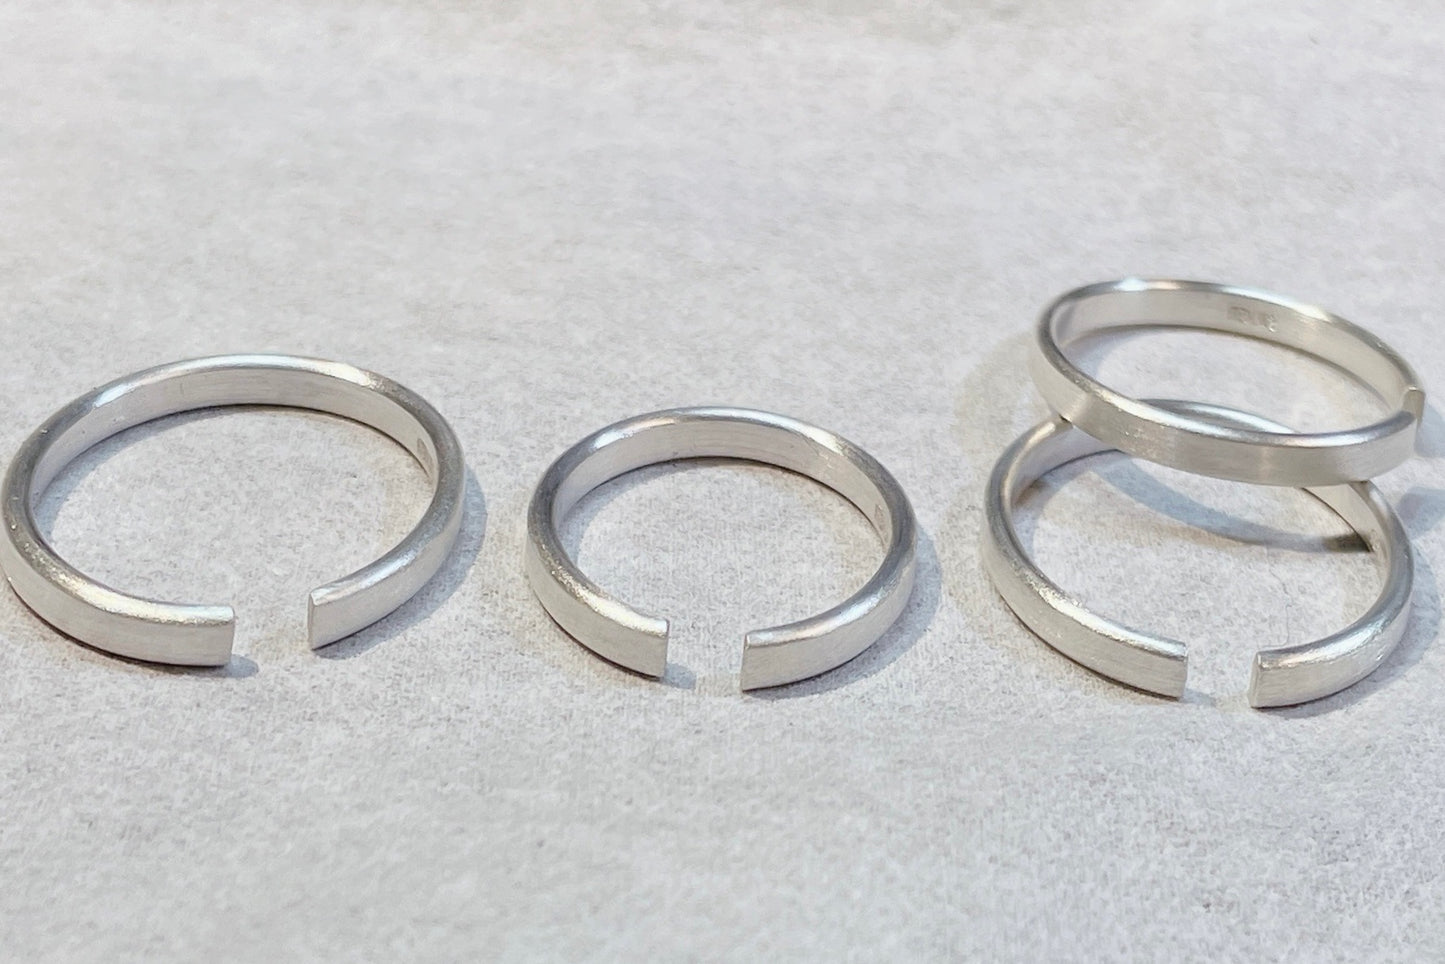 Adjustable Freely Sterling Silver925 Ring with Matte Finish For Men & Women 艶消し・シルバー ユニセックス 調節可能 フリーリング